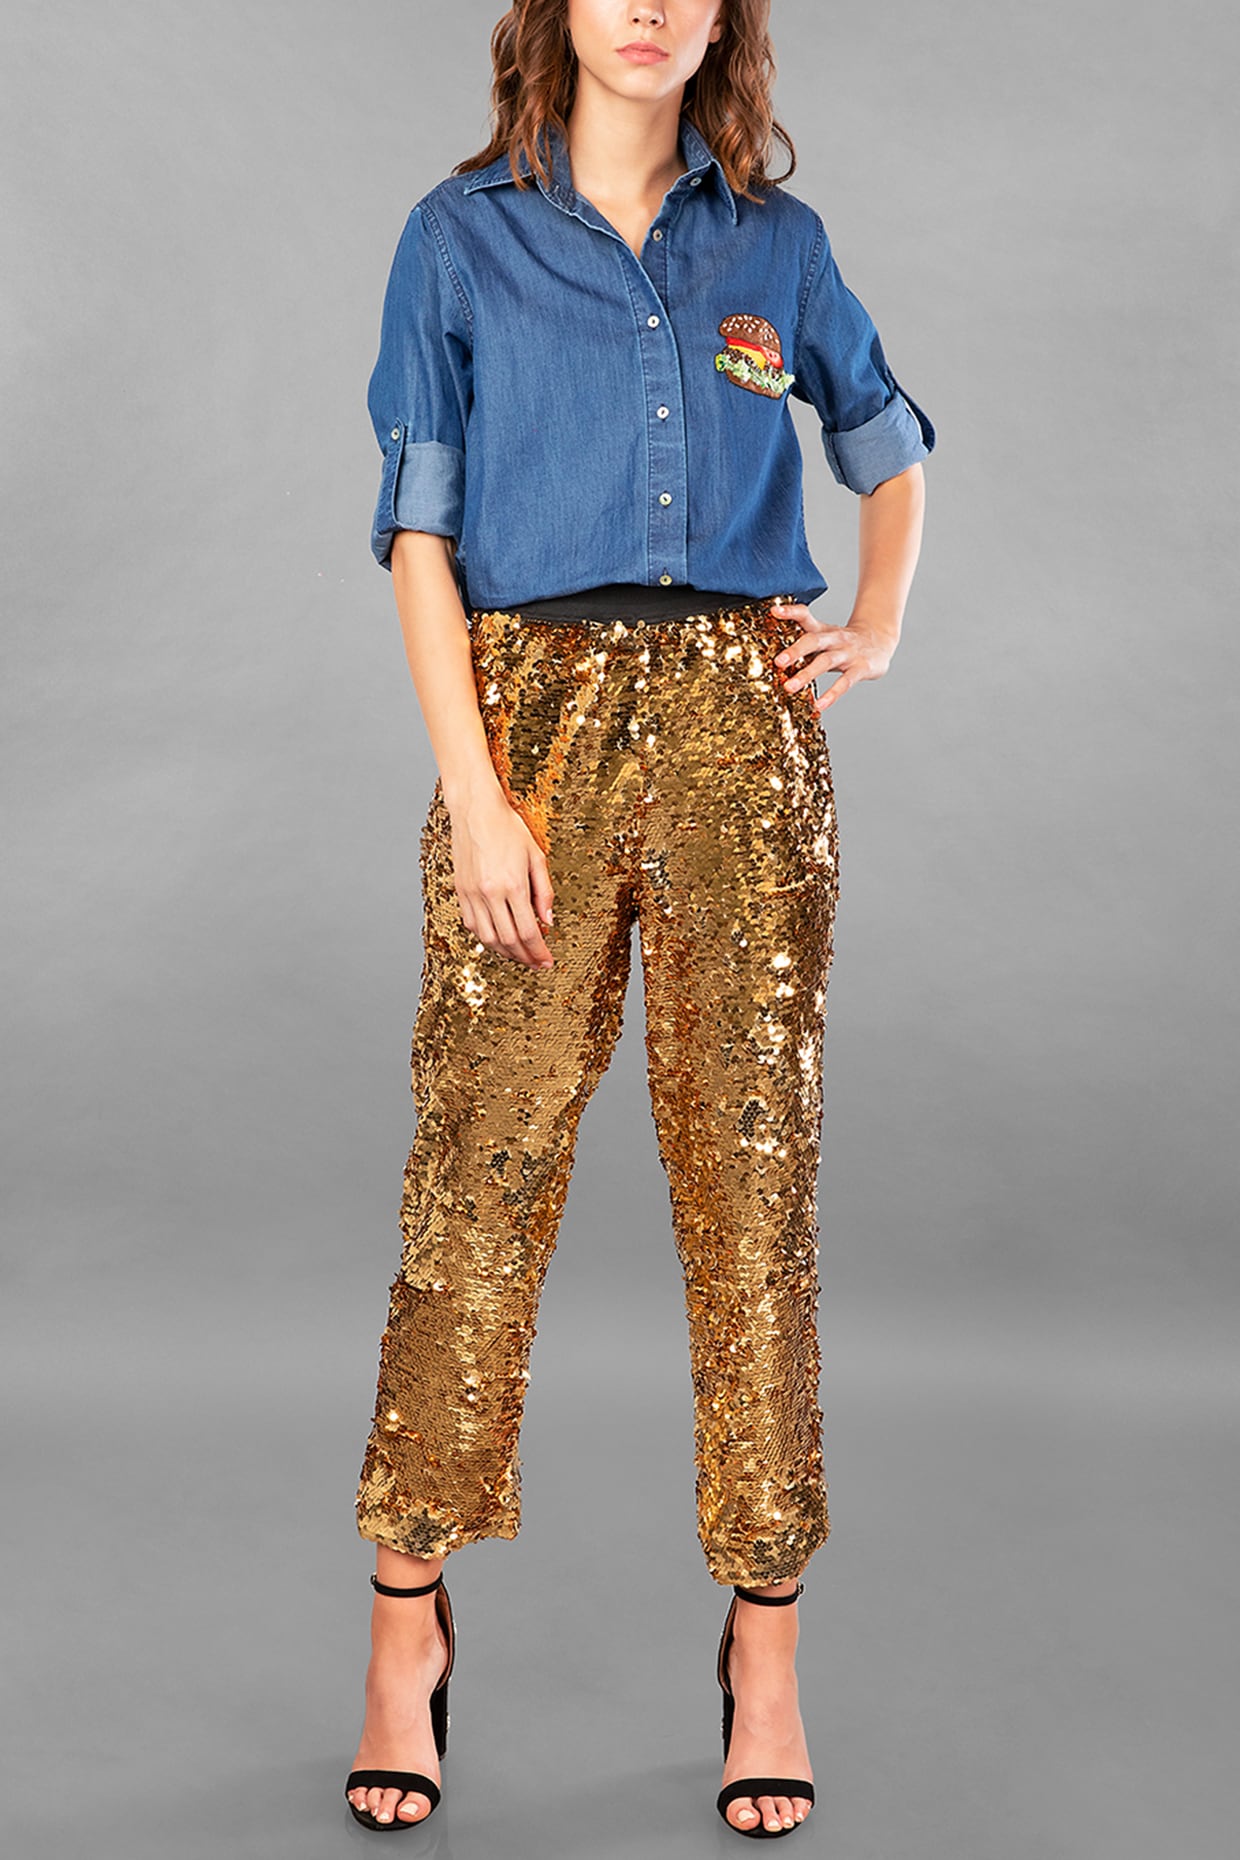 Zara Sequin Pants and Top Wide Leg Style Charade